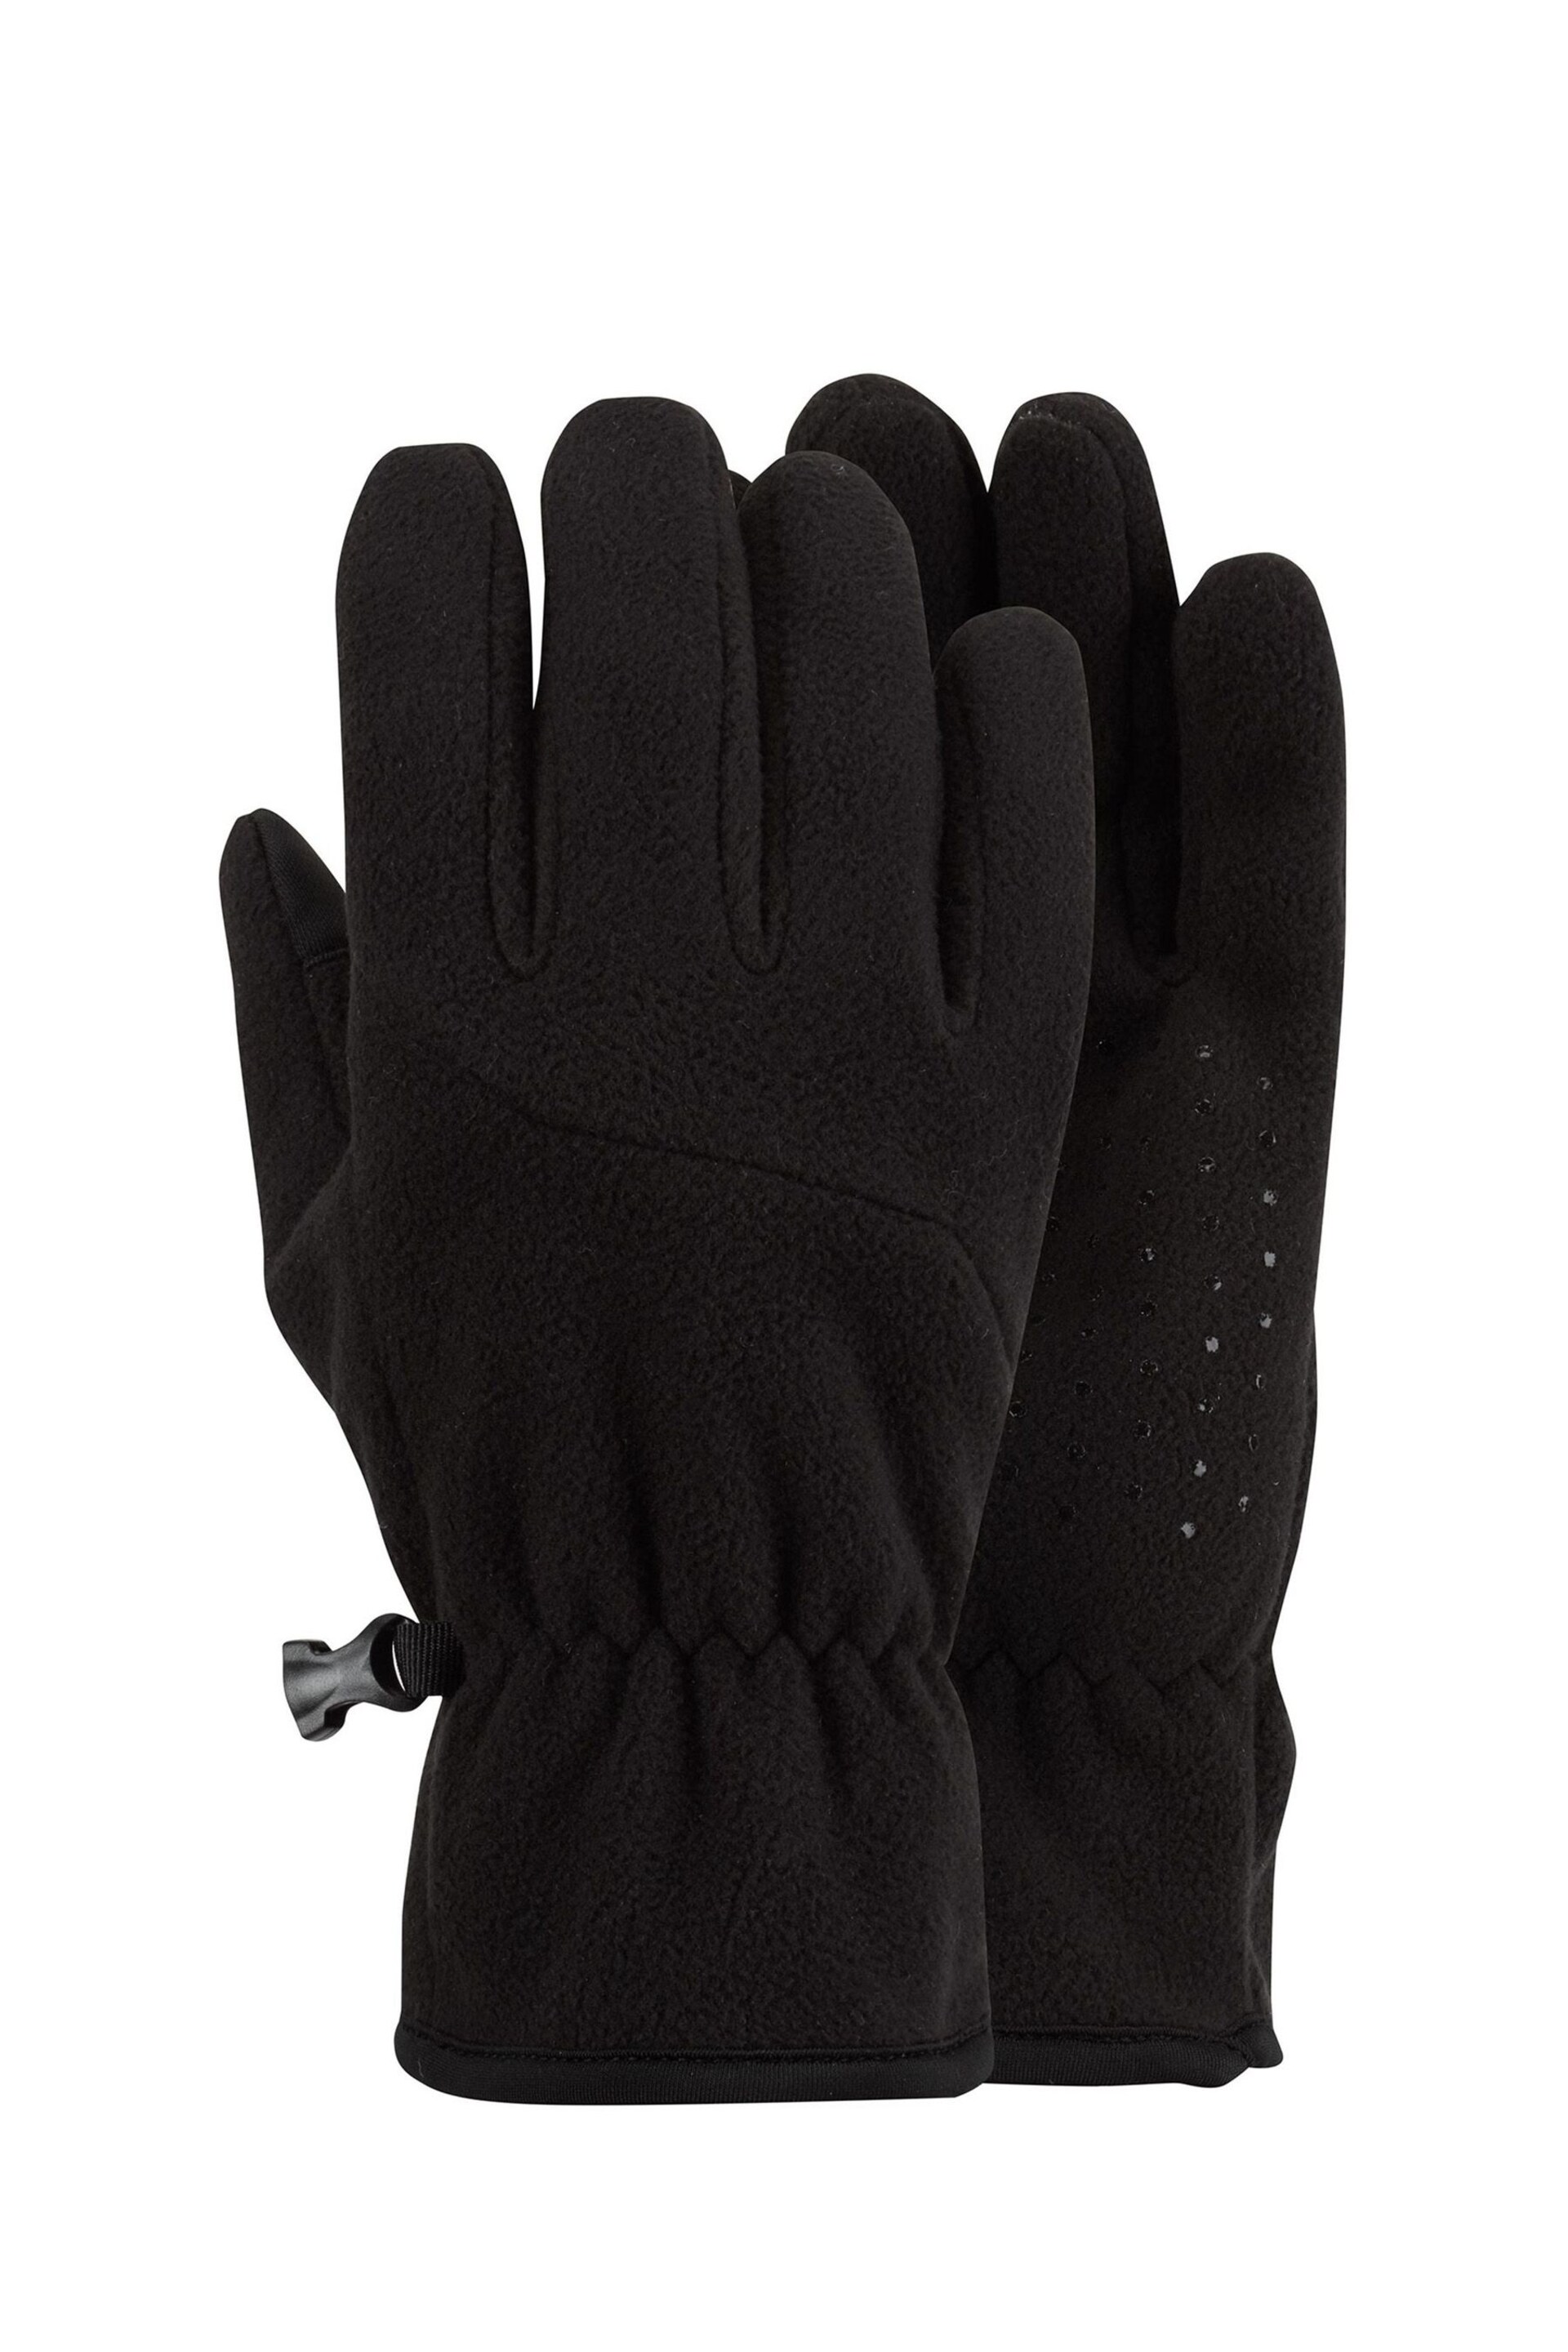 Tog 24 Black Gust Powerstretch Gloves - Image 1 of 3